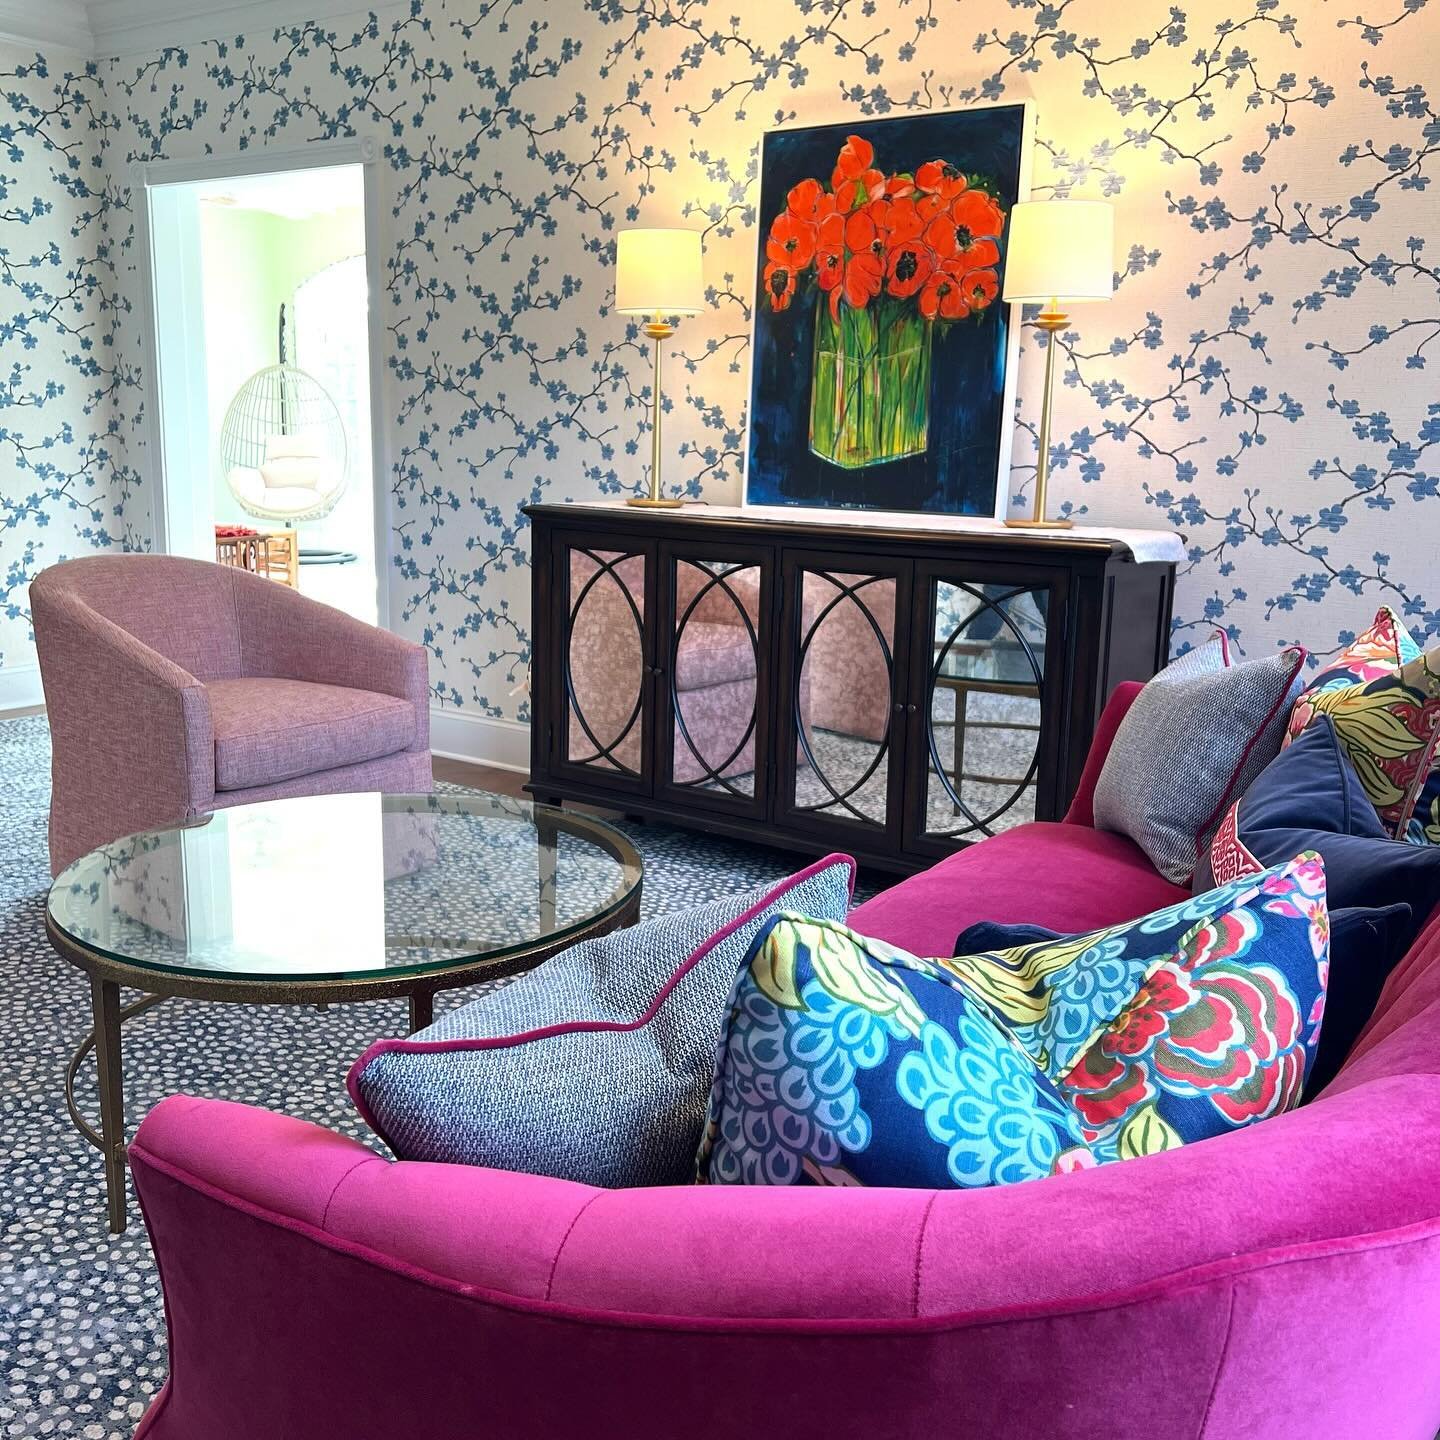 A bright &amp; beautiful room install just in time for the holidays. We LOVE the magenta velvet sofa paired with cute colorful swivels by @wesleyhallfurniture. Area rug expertly created and installed by @albed_rug_co. Happy holidays indeed! #mainline